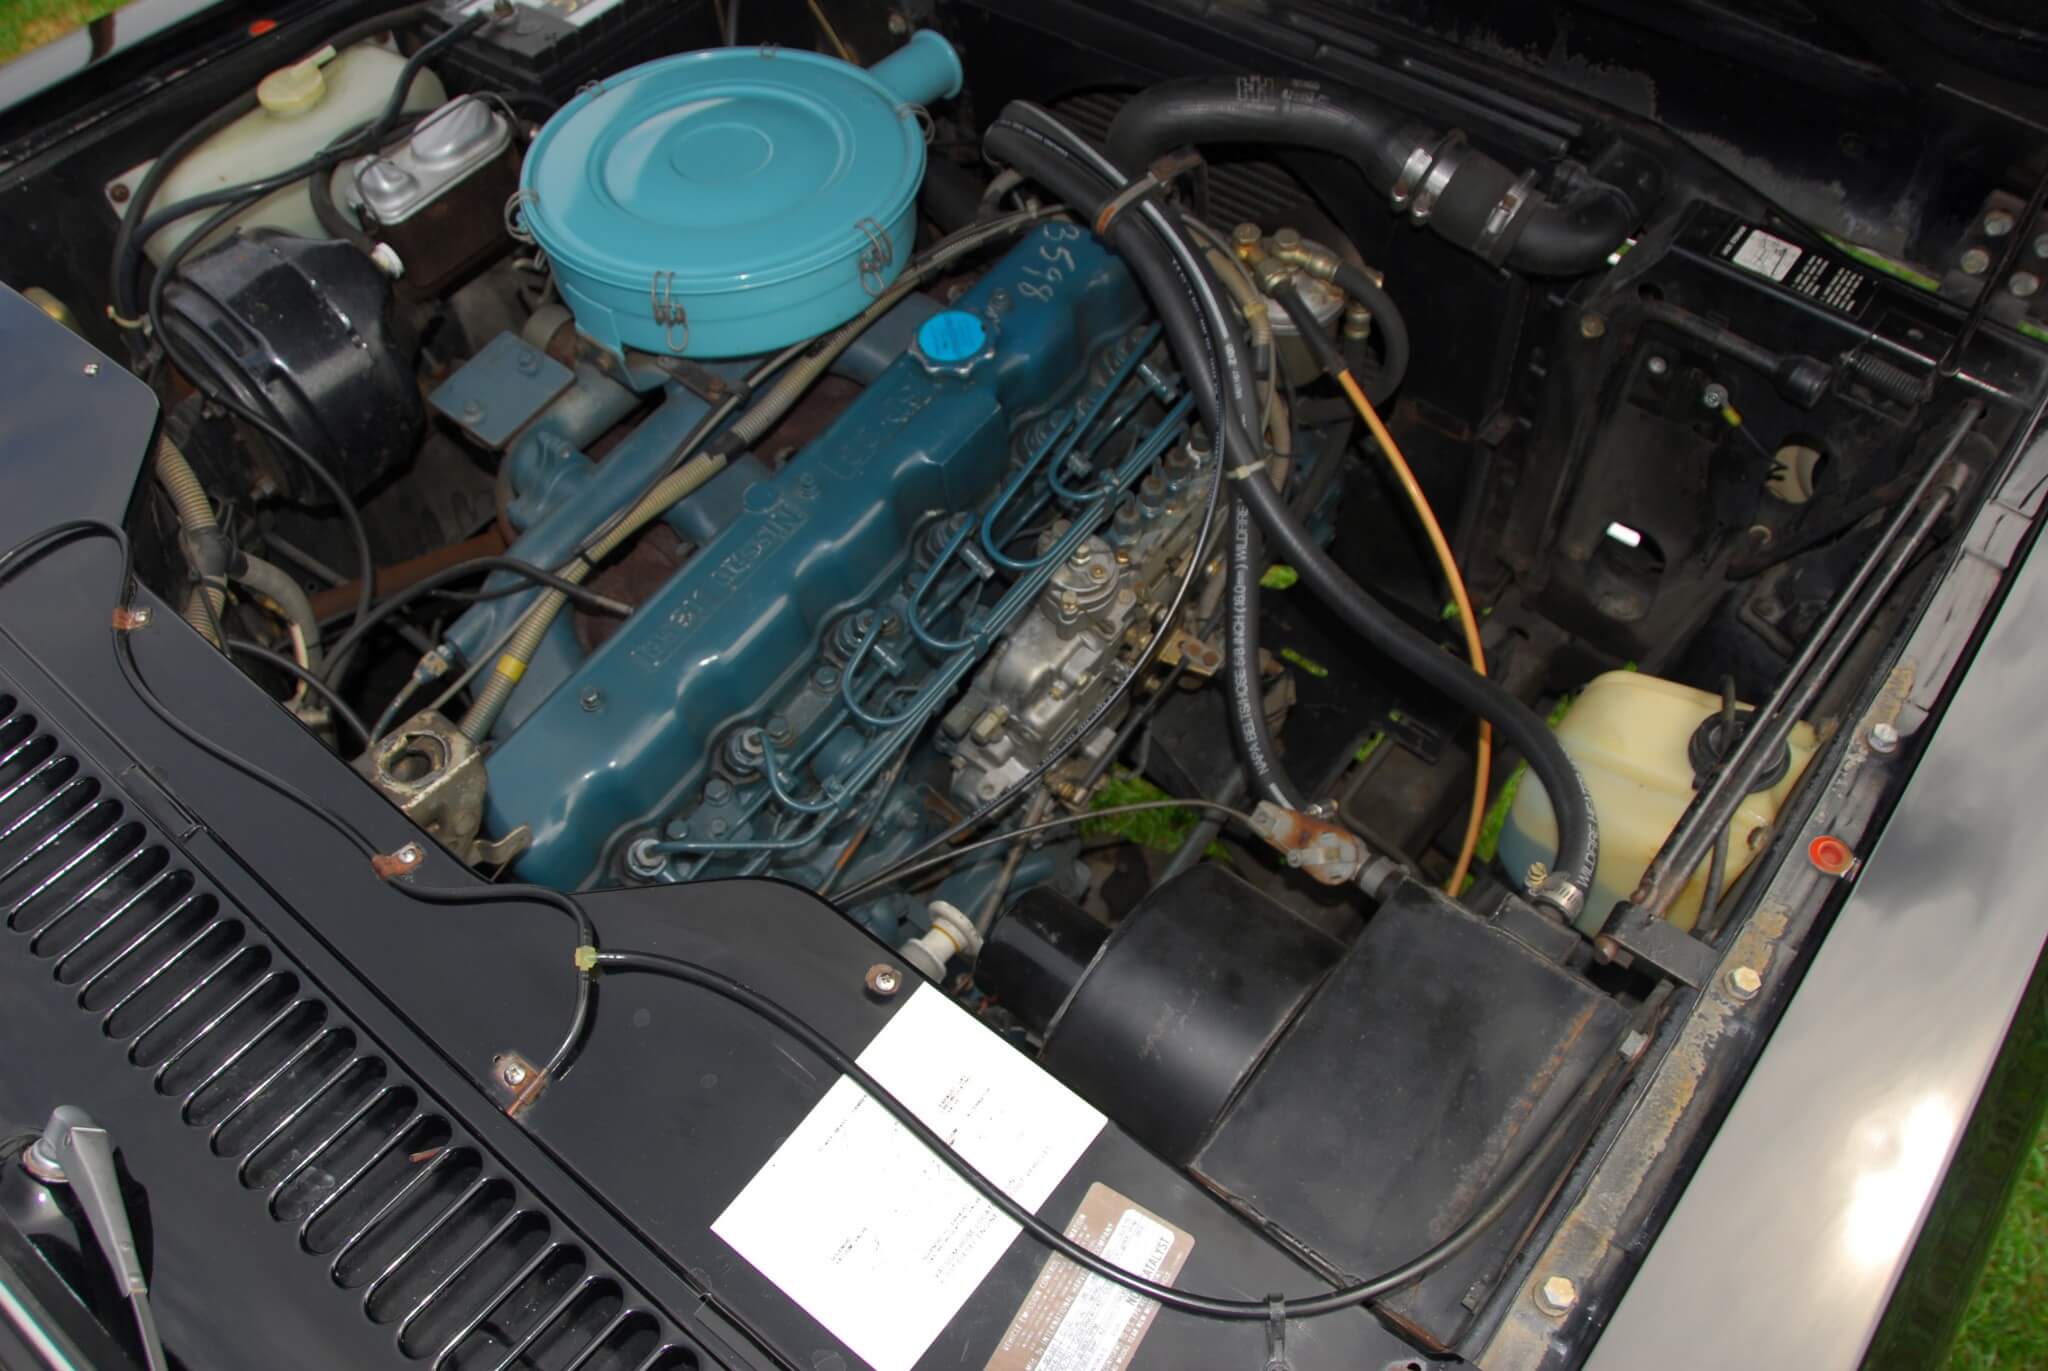 This unaltered SD33T in installed in a 1980 Scout. The engine fits well under the hood and weighs about the same as IH’s smaller V-8s. Dimensions were similar to the AMC-sourced 232 and 258 inline sixes offered by IH in the past.